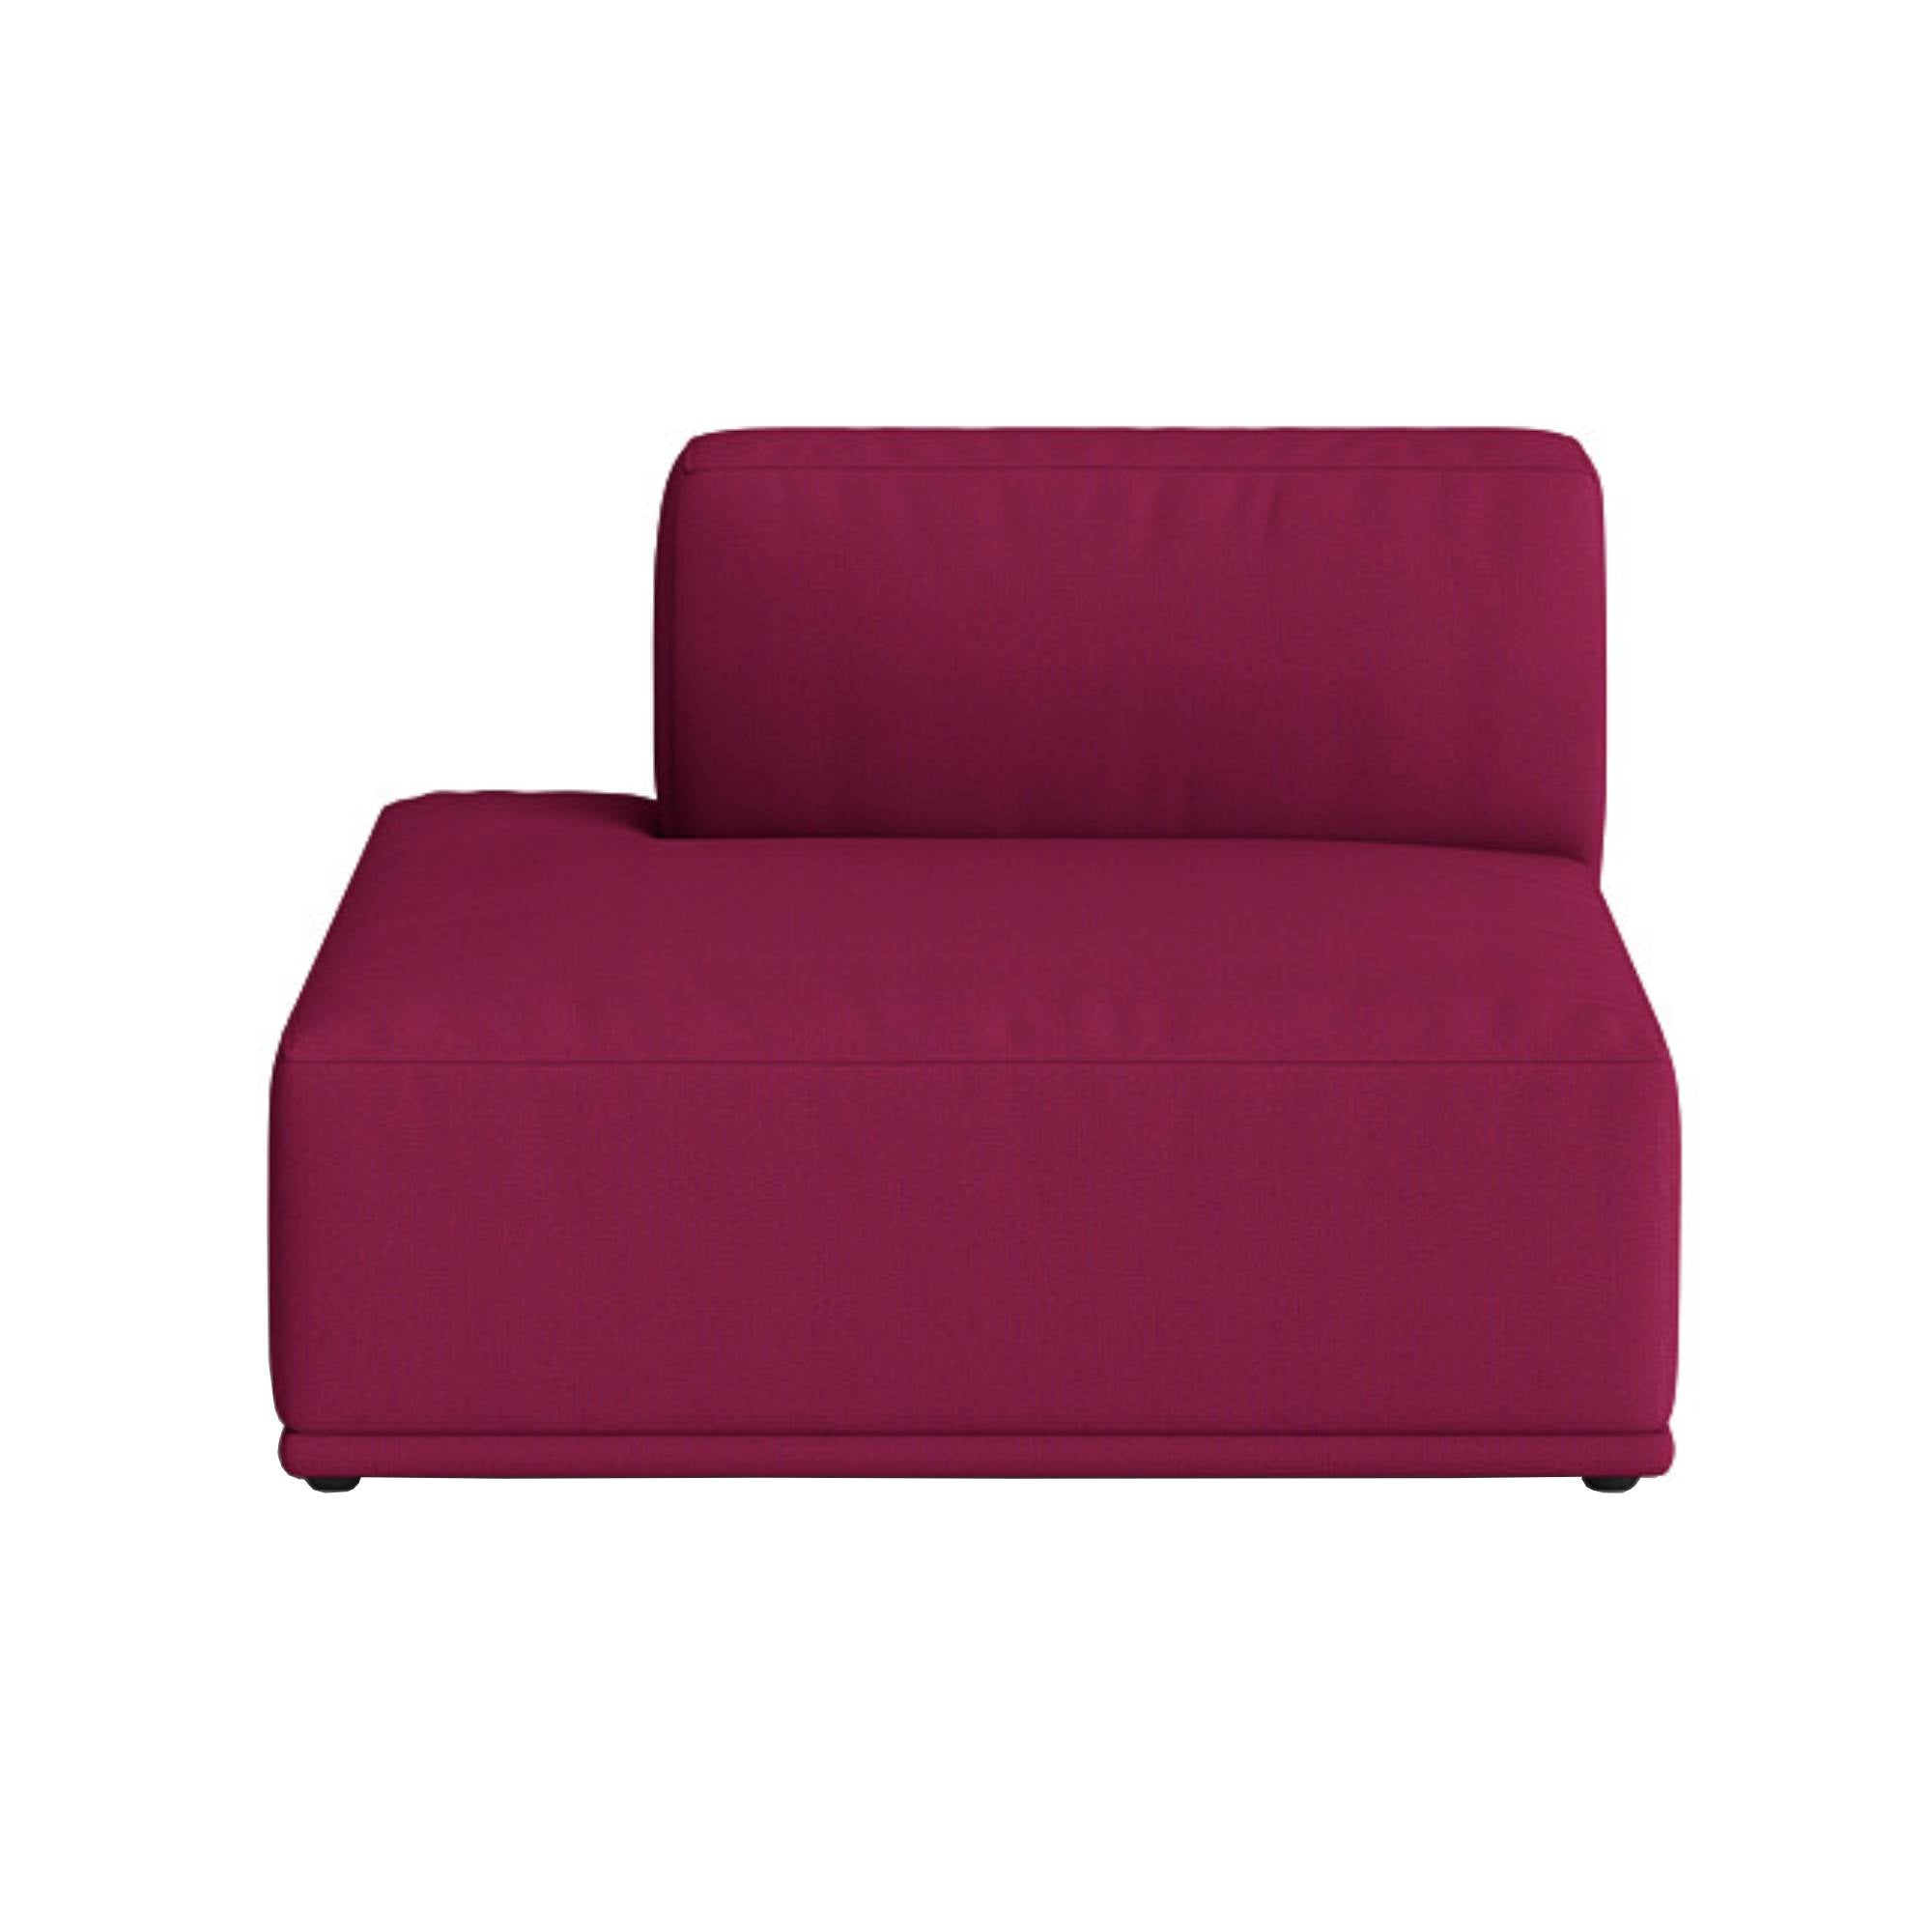 Connect Soft Sofa Modules: Left Open Ended